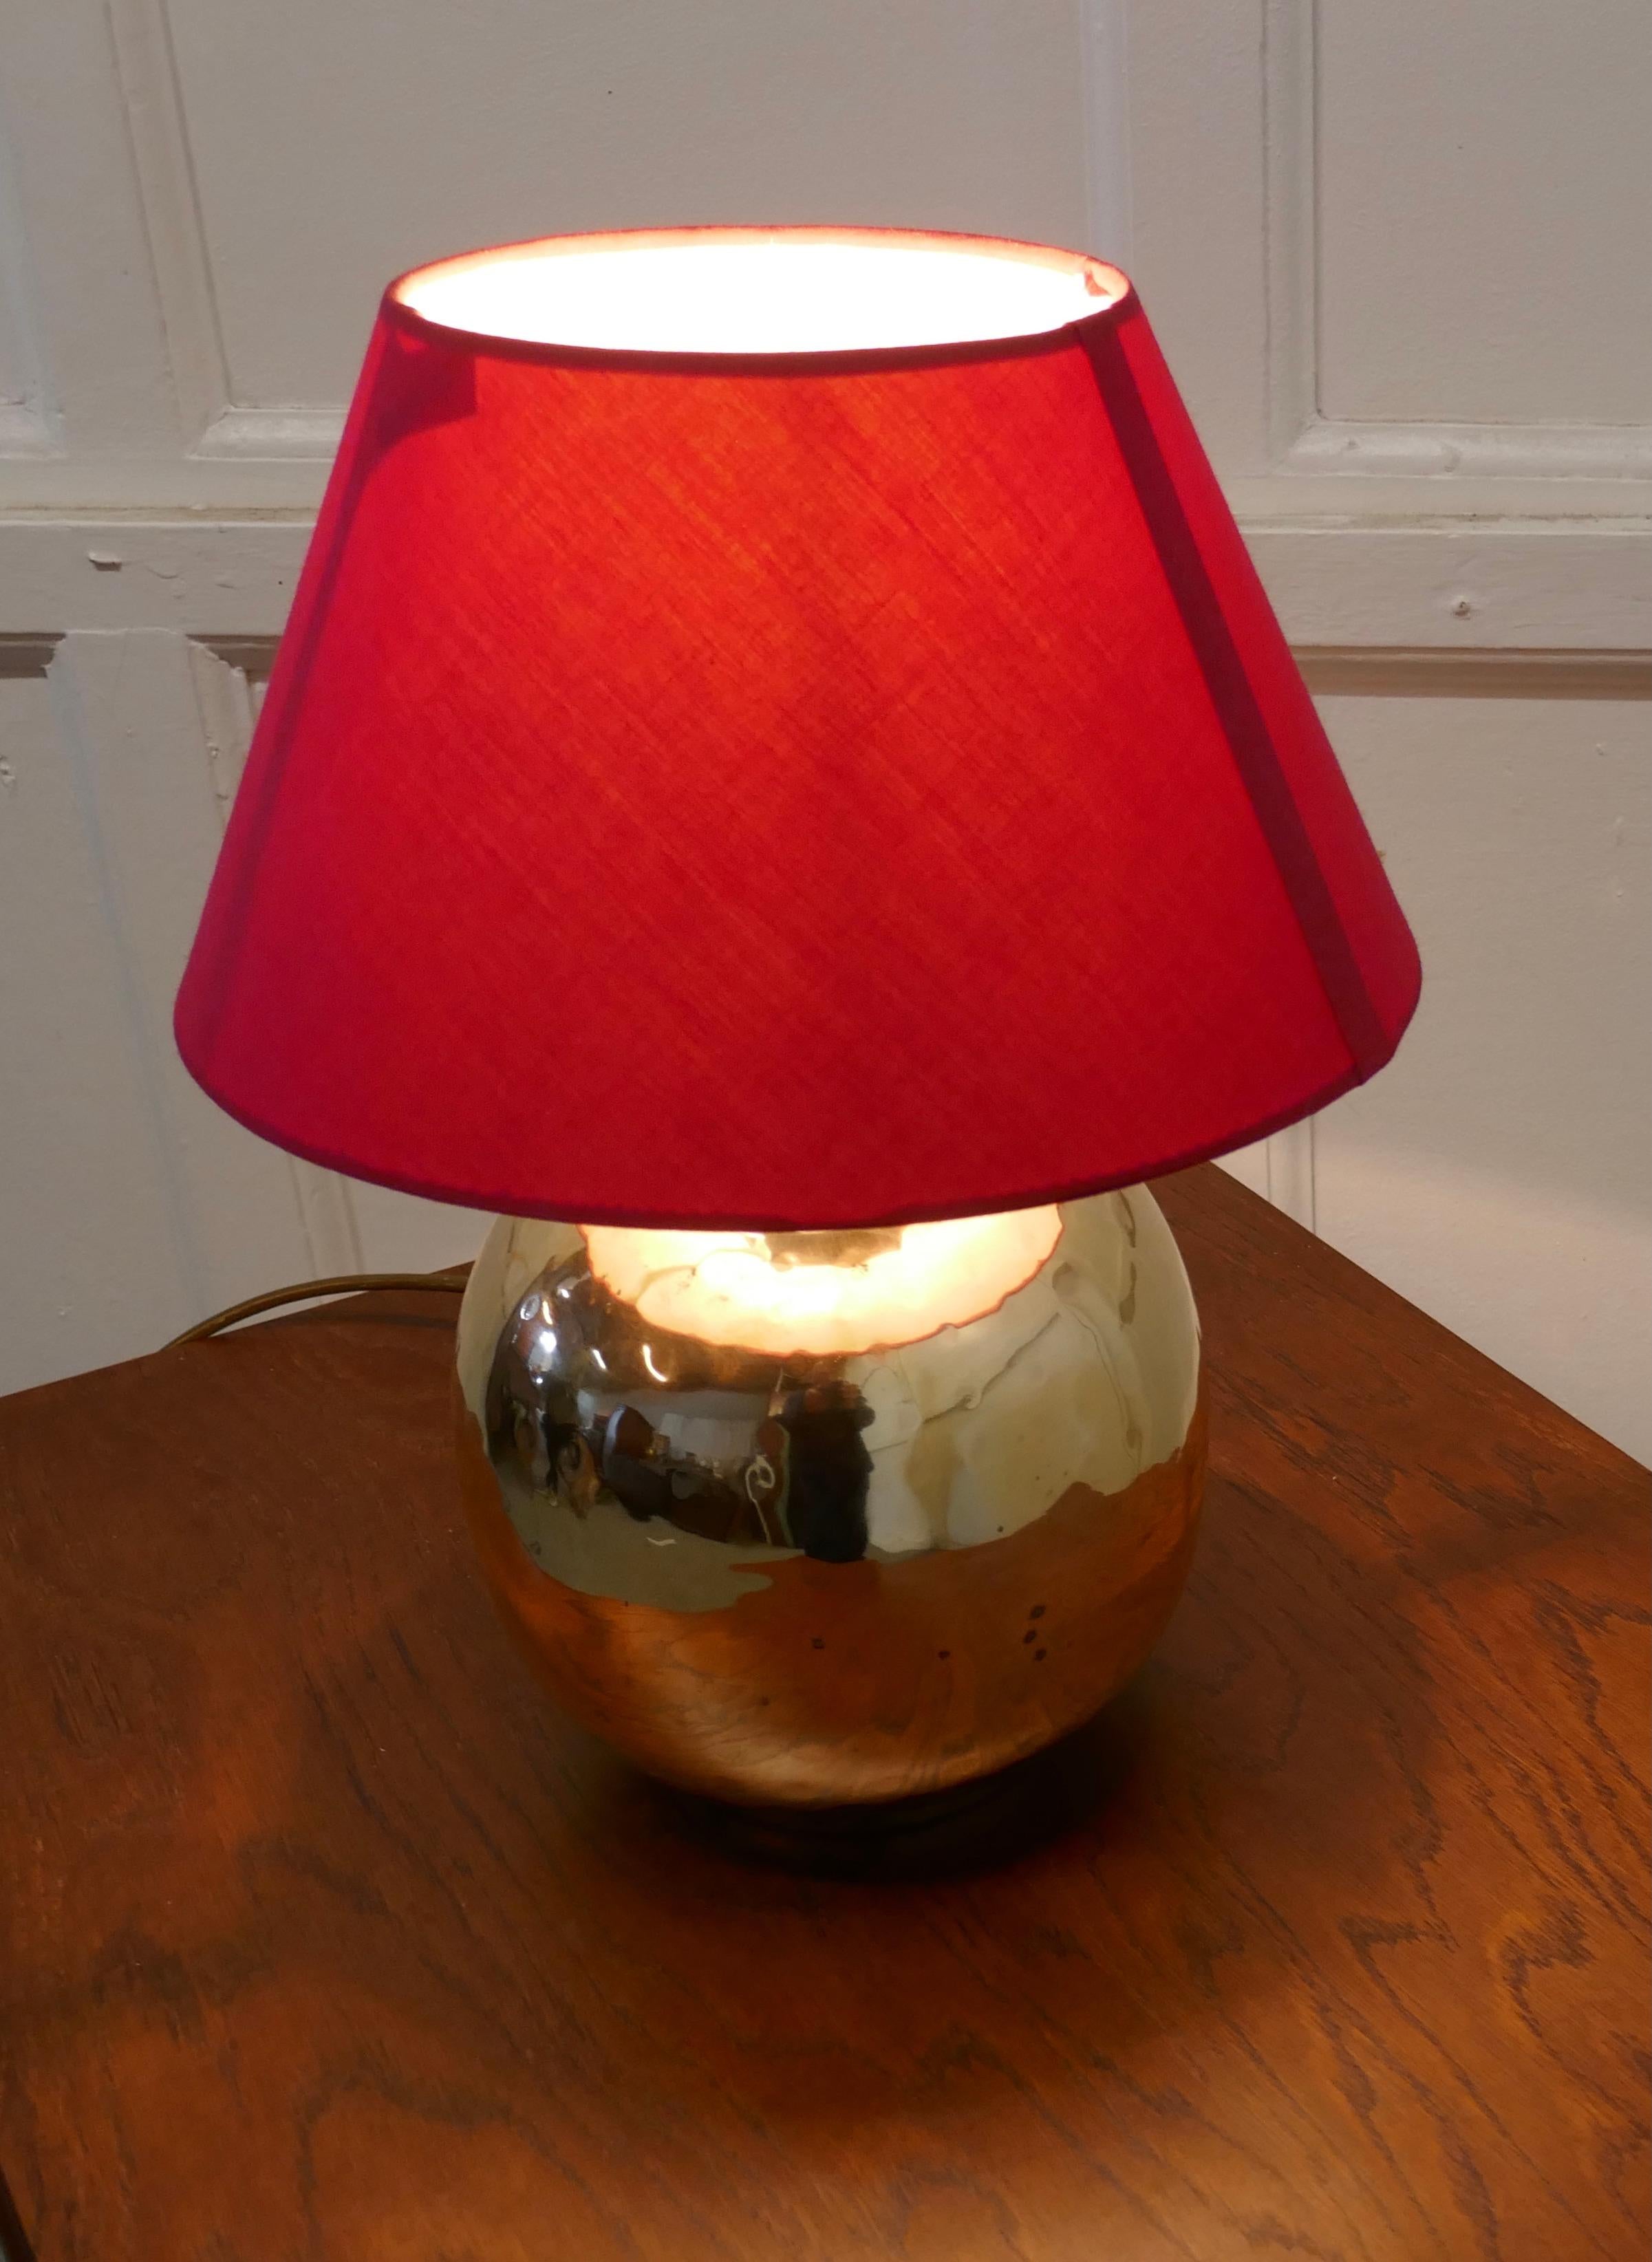 Large brass ball table lamp 

This is an unusual Lamp has a smooth globe shape and a red lampshade 
The lamp is fully wired and in good condition, a statement piece in any room
The lamp is 15” tall, 12” in diameter and the shade is 20” in